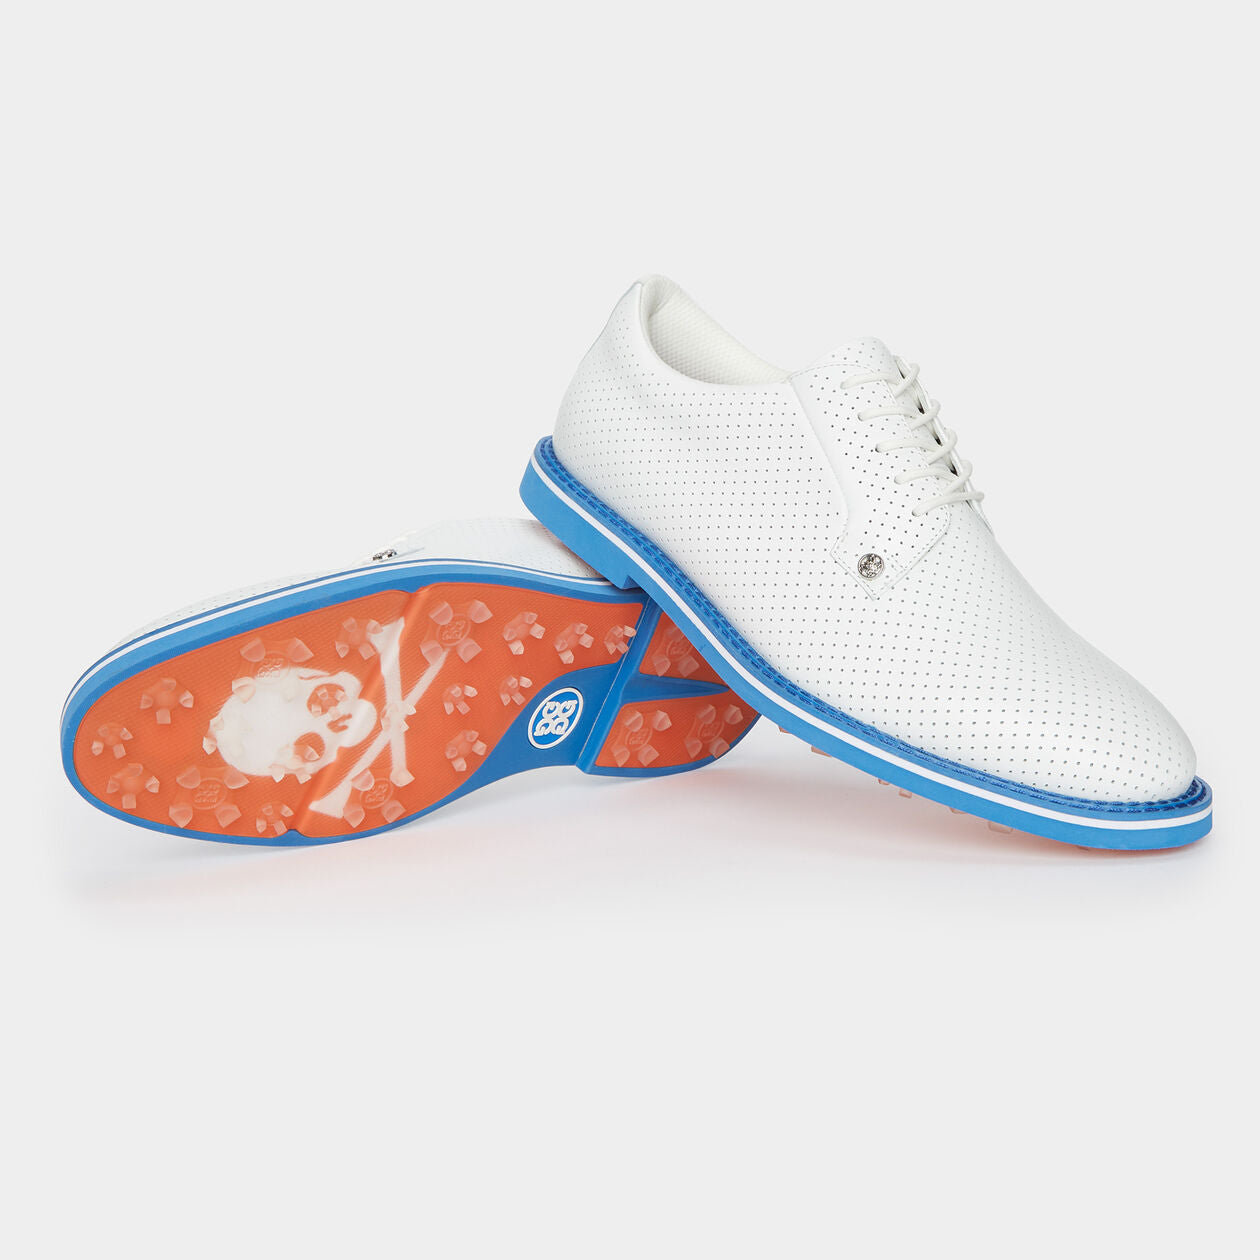 G/Fore Perforated Gallivanter Golf Shoe